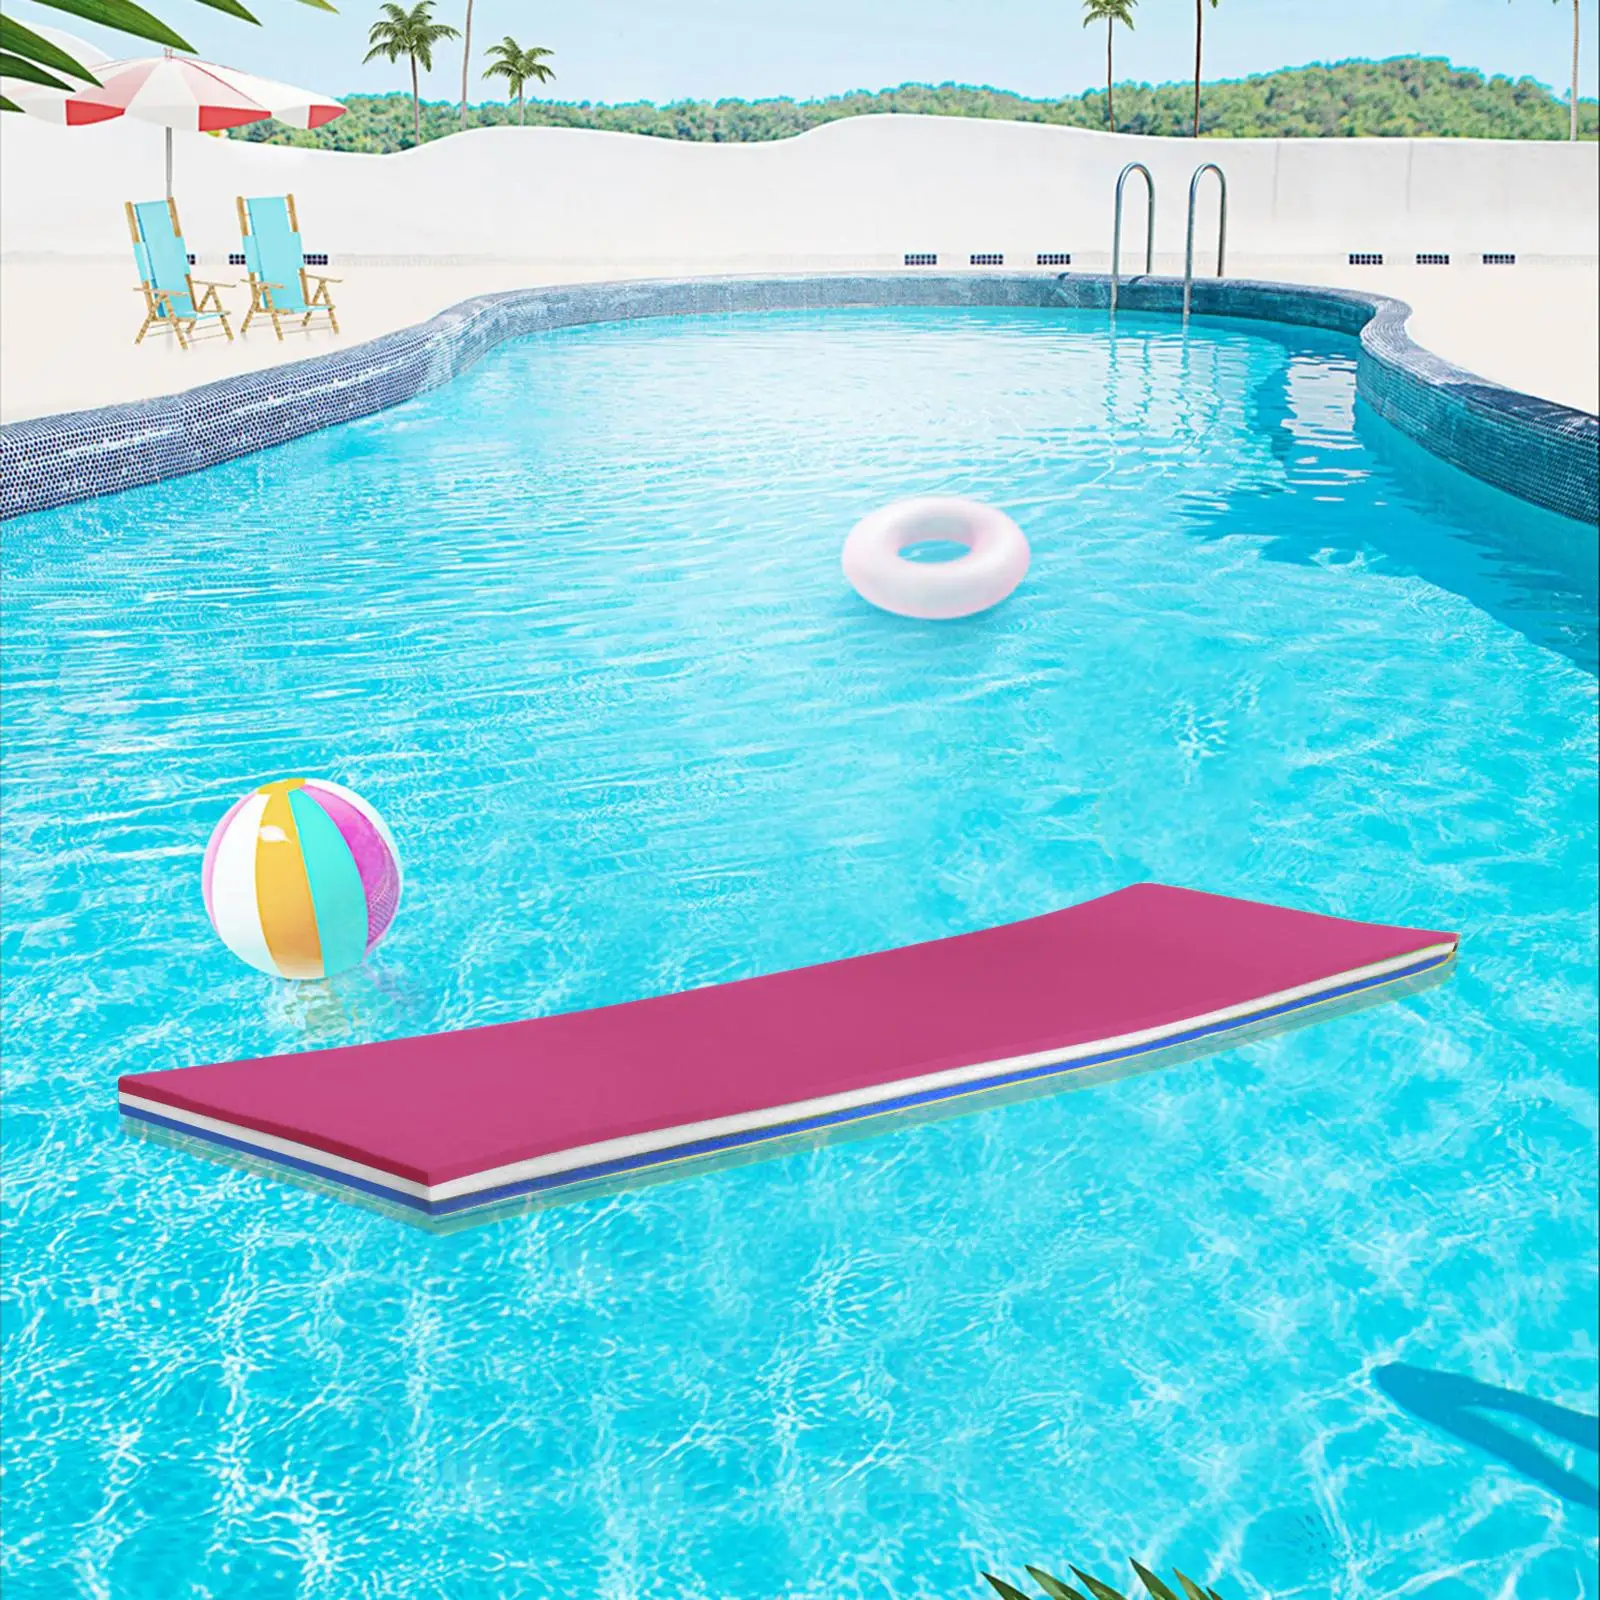 Pool Floating Water Mat 3 Layer Water Raft 43x15.7x1.3Inches Durable Having Fun on The Water for Relaxing Xpe Foam Mat